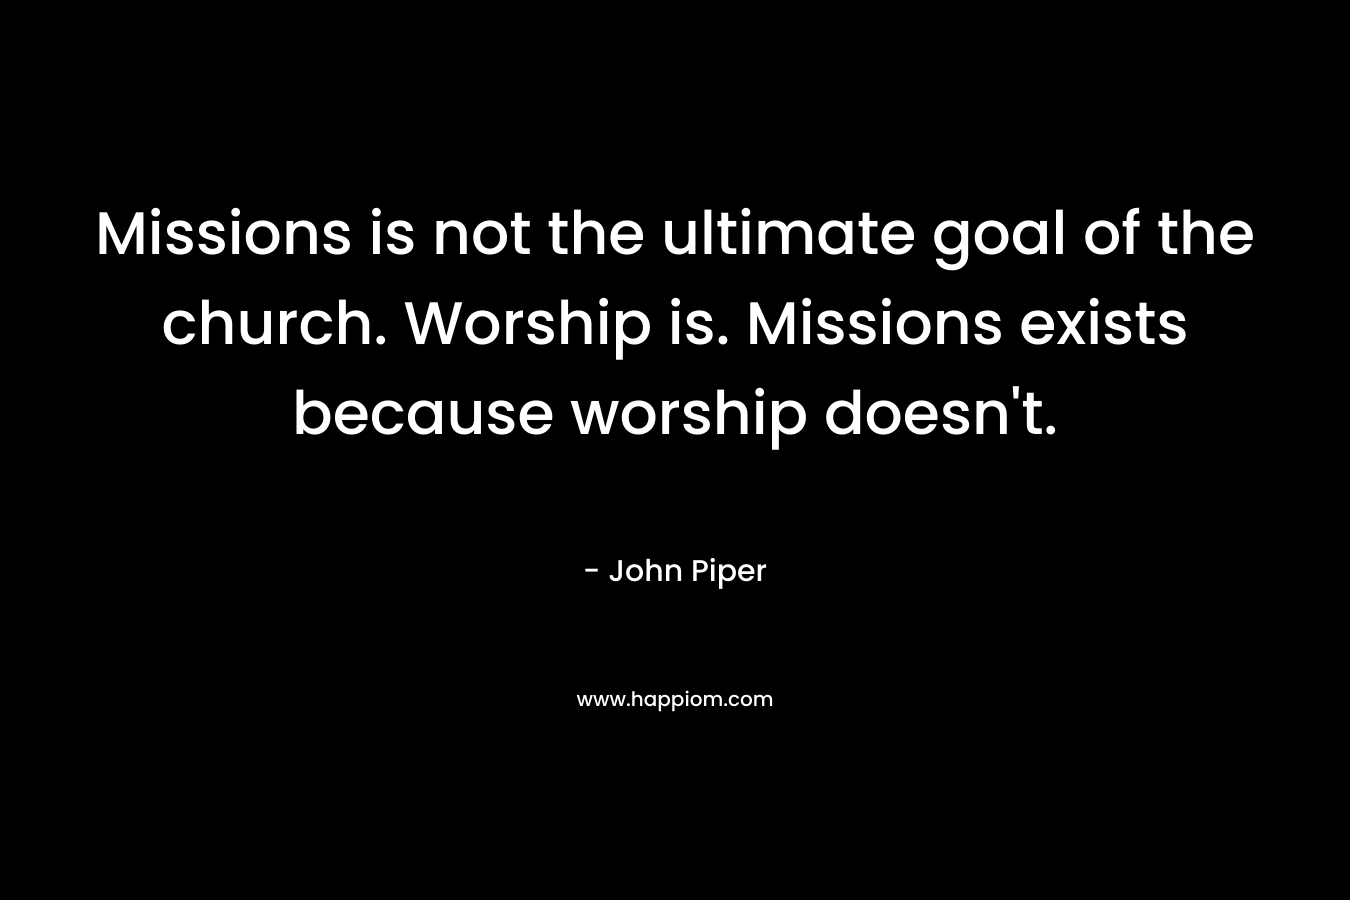 Missions is not the ultimate goal of the church. Worship is. Missions exists because worship doesn’t. – John Piper